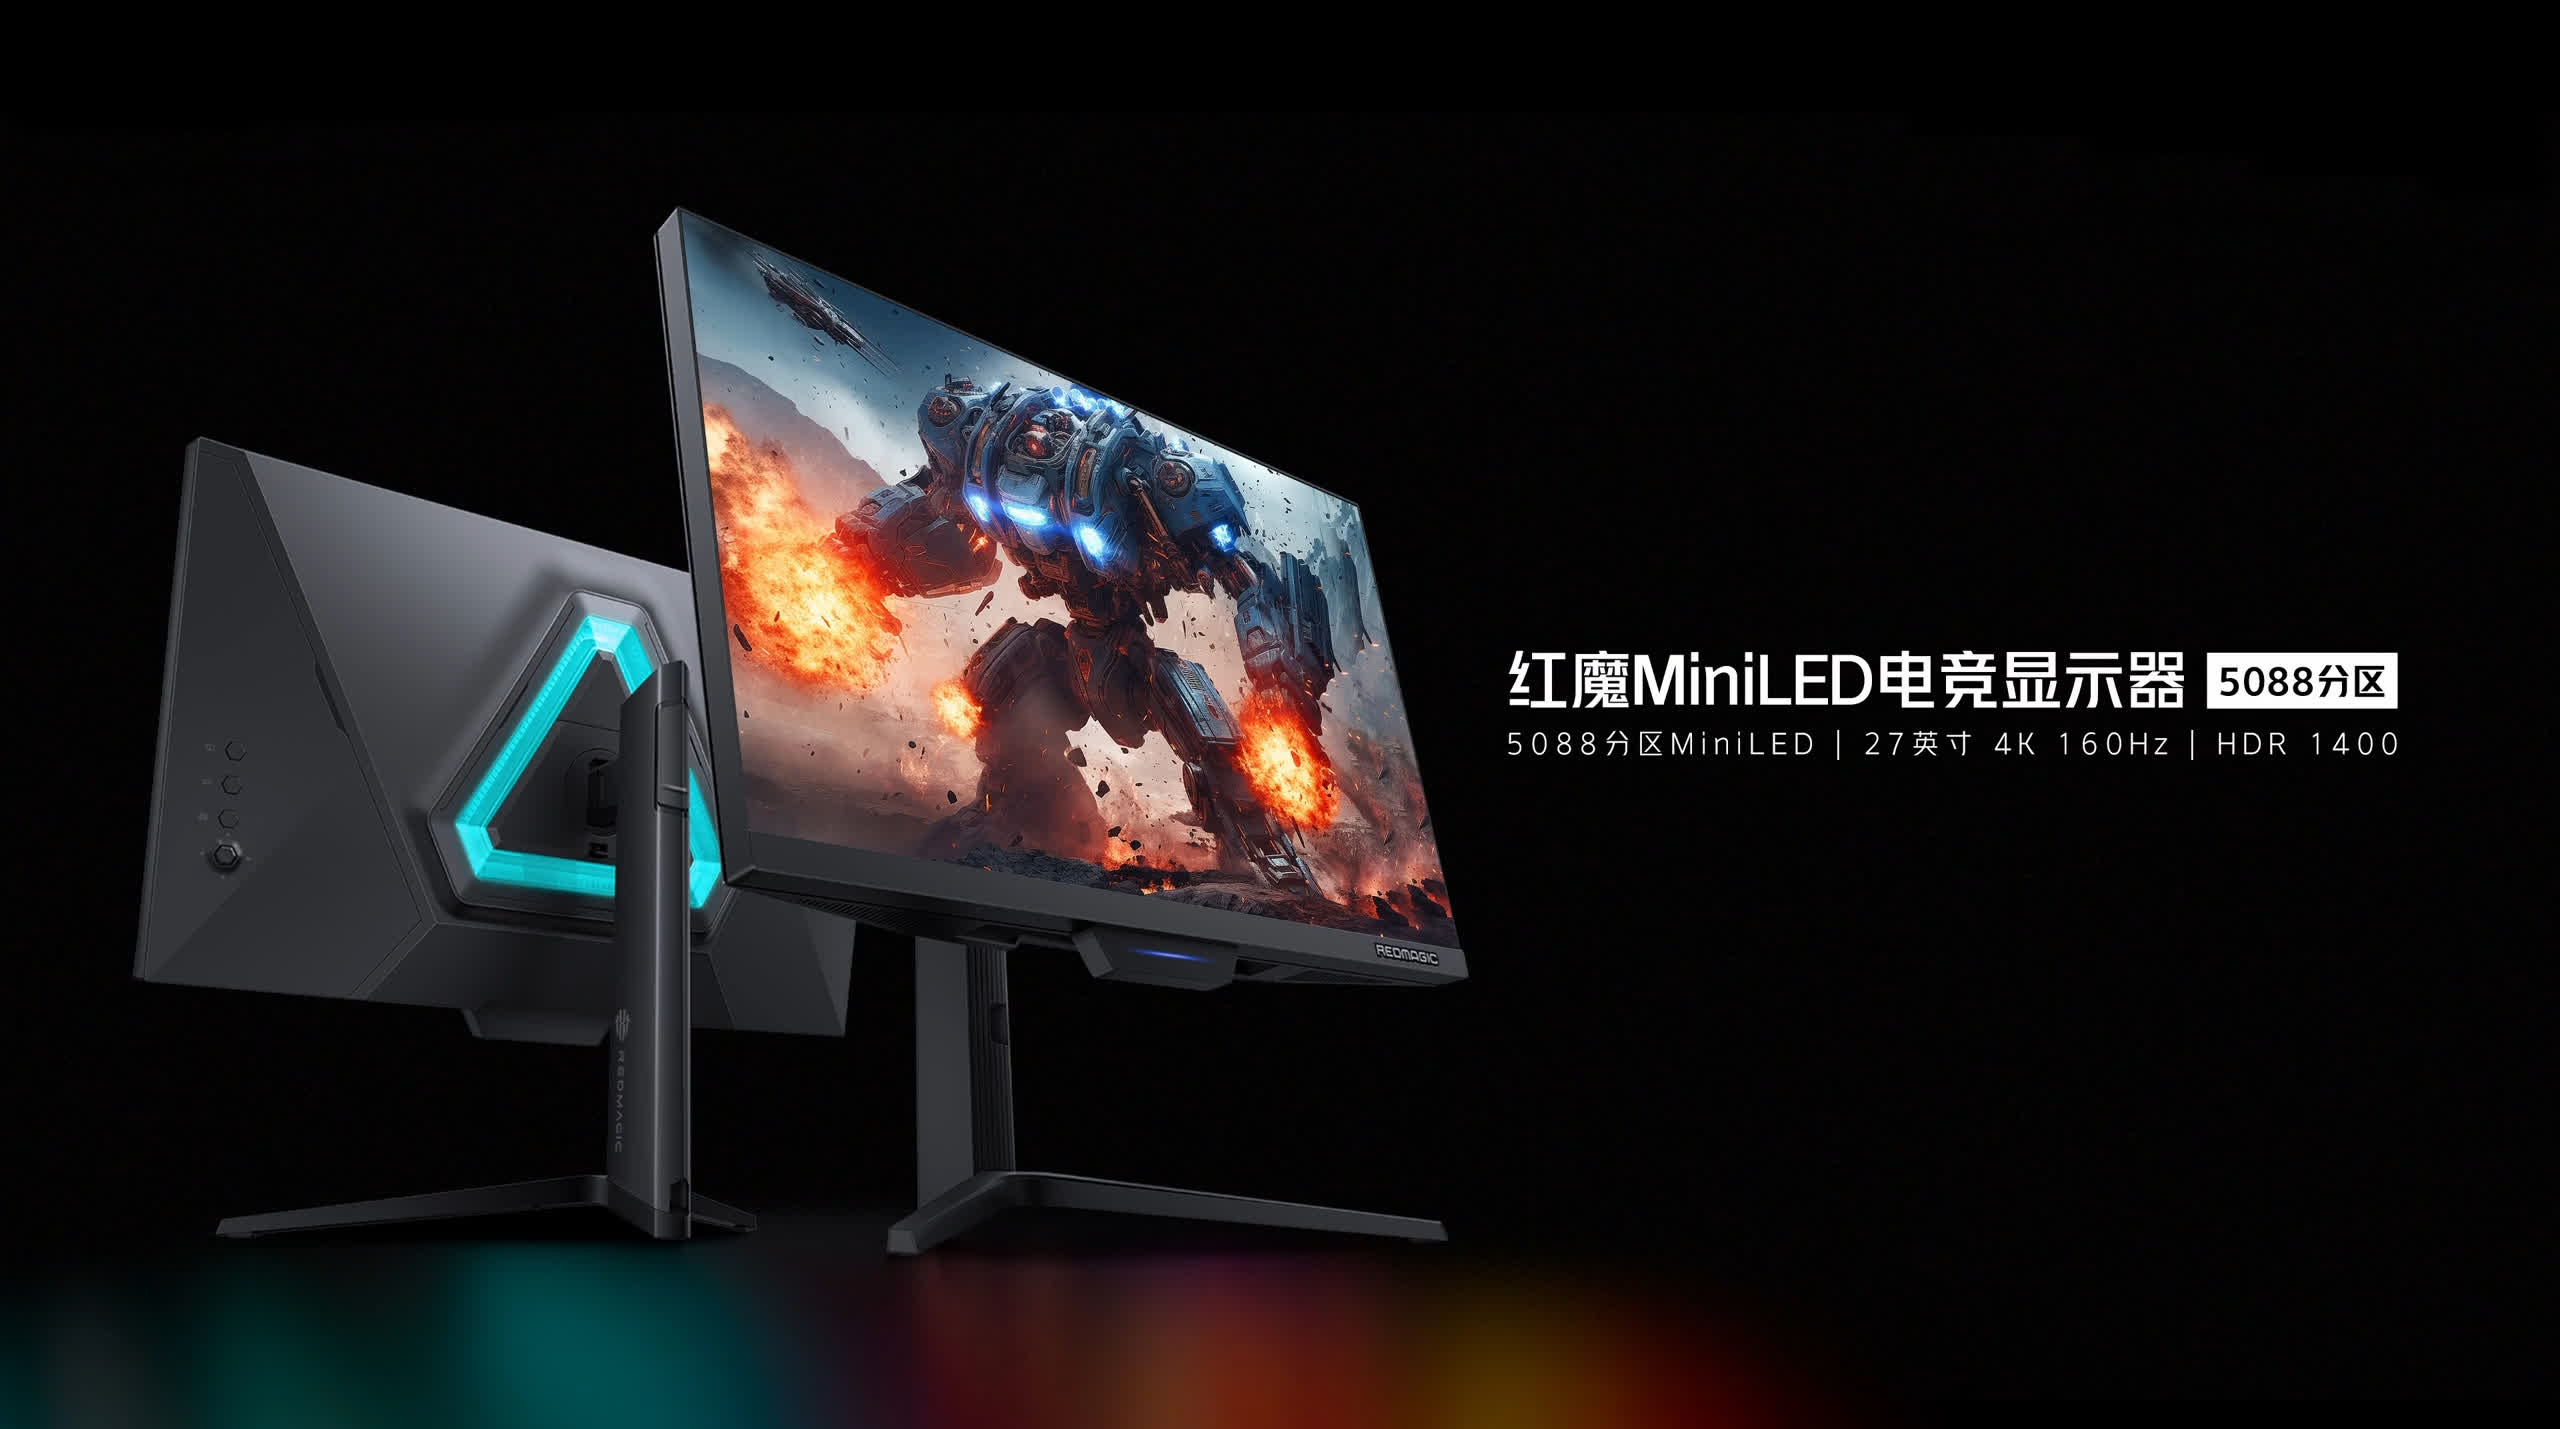 Redmagic introduces a 4K gaming monitor with 5088-zone mini LED backlight